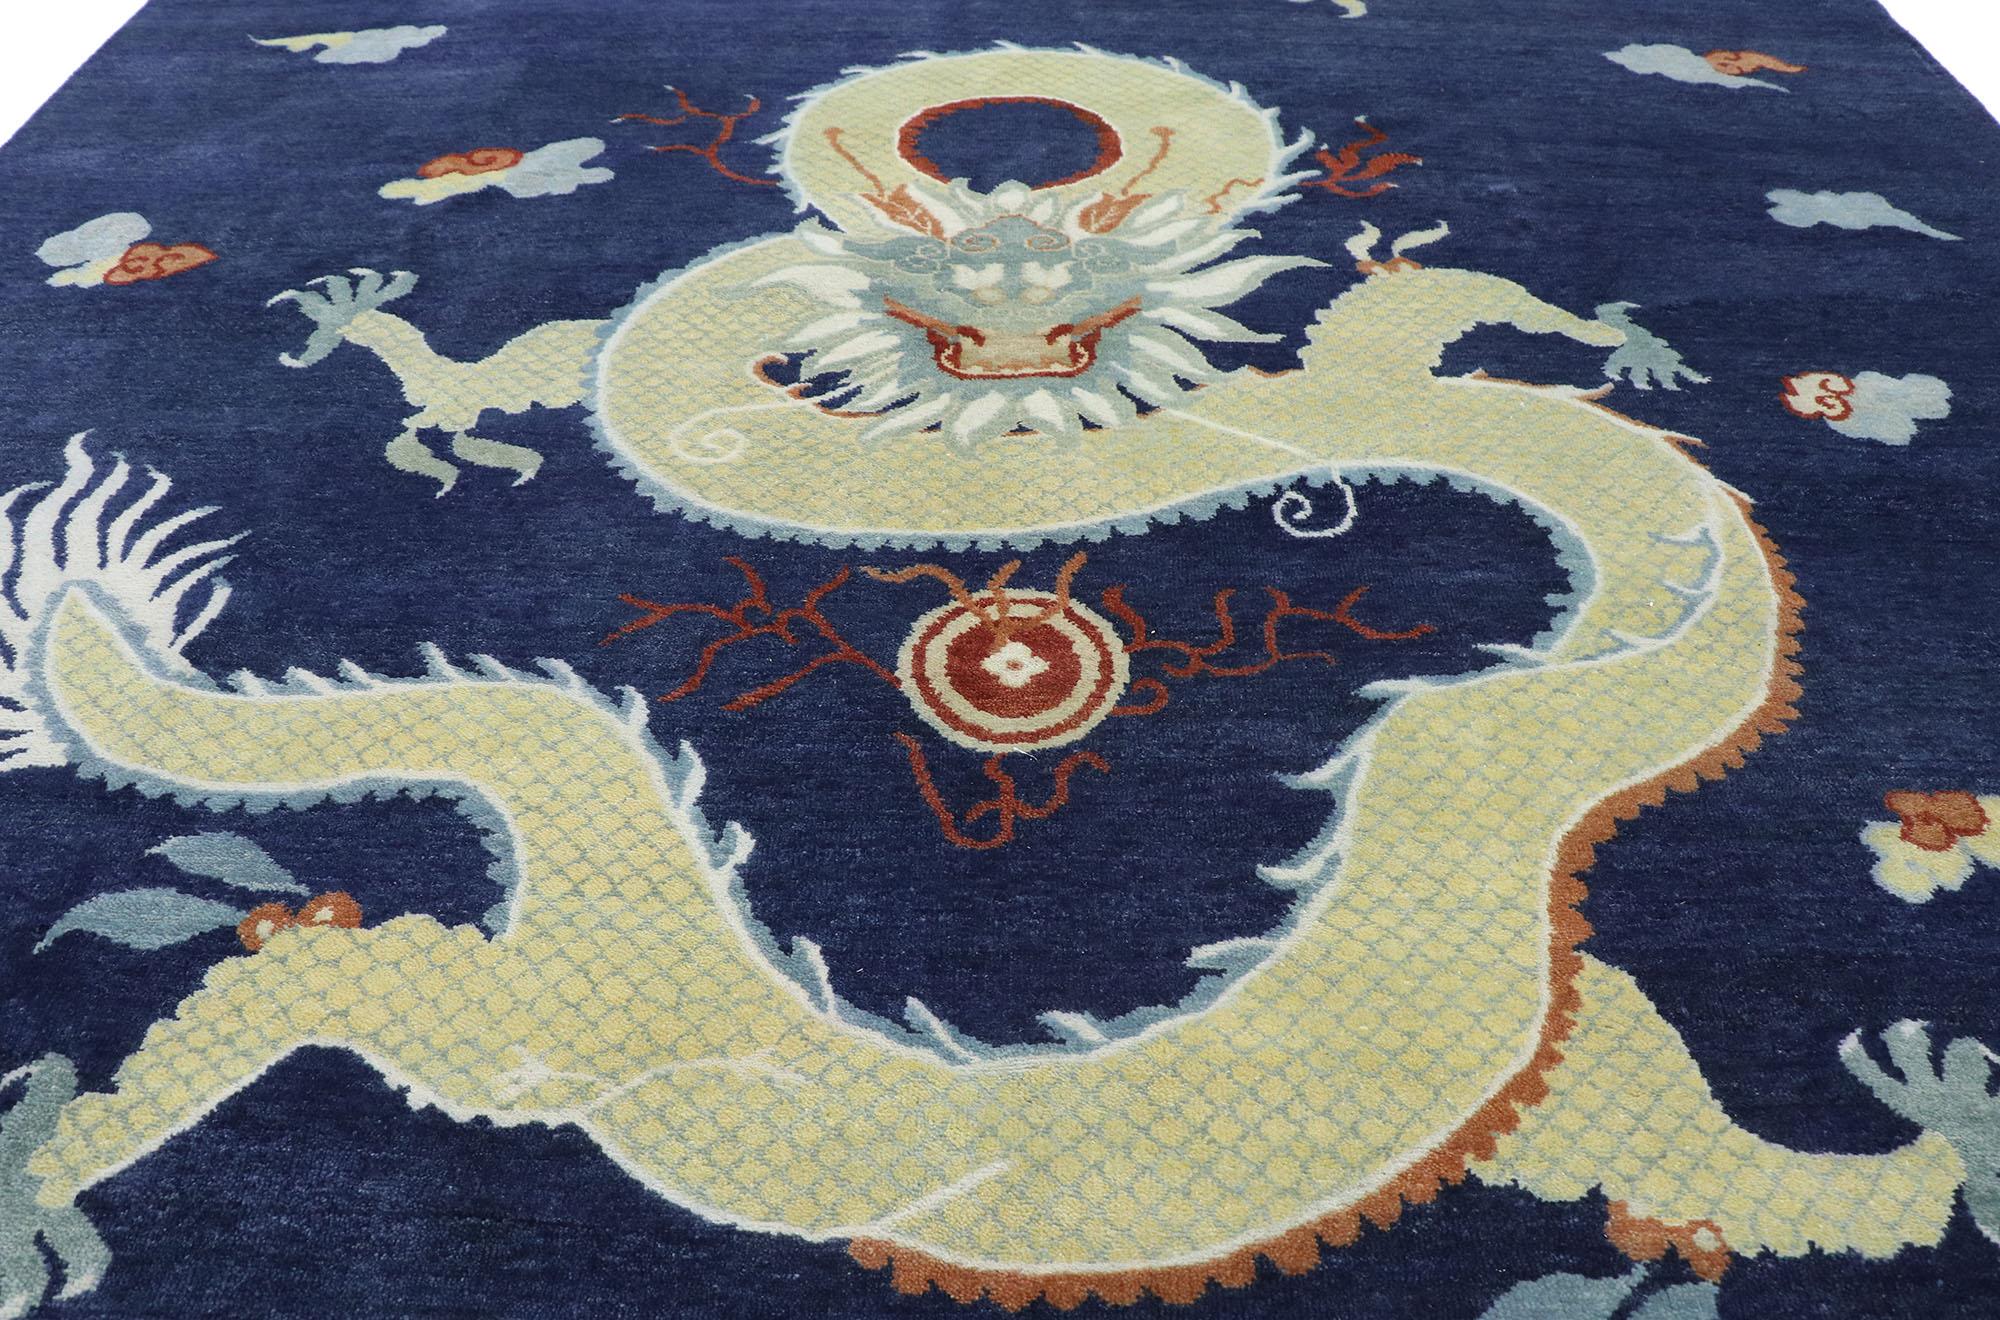 Ming New Contemporary Chinese Art Deco Style Dragon Pictorial Rug